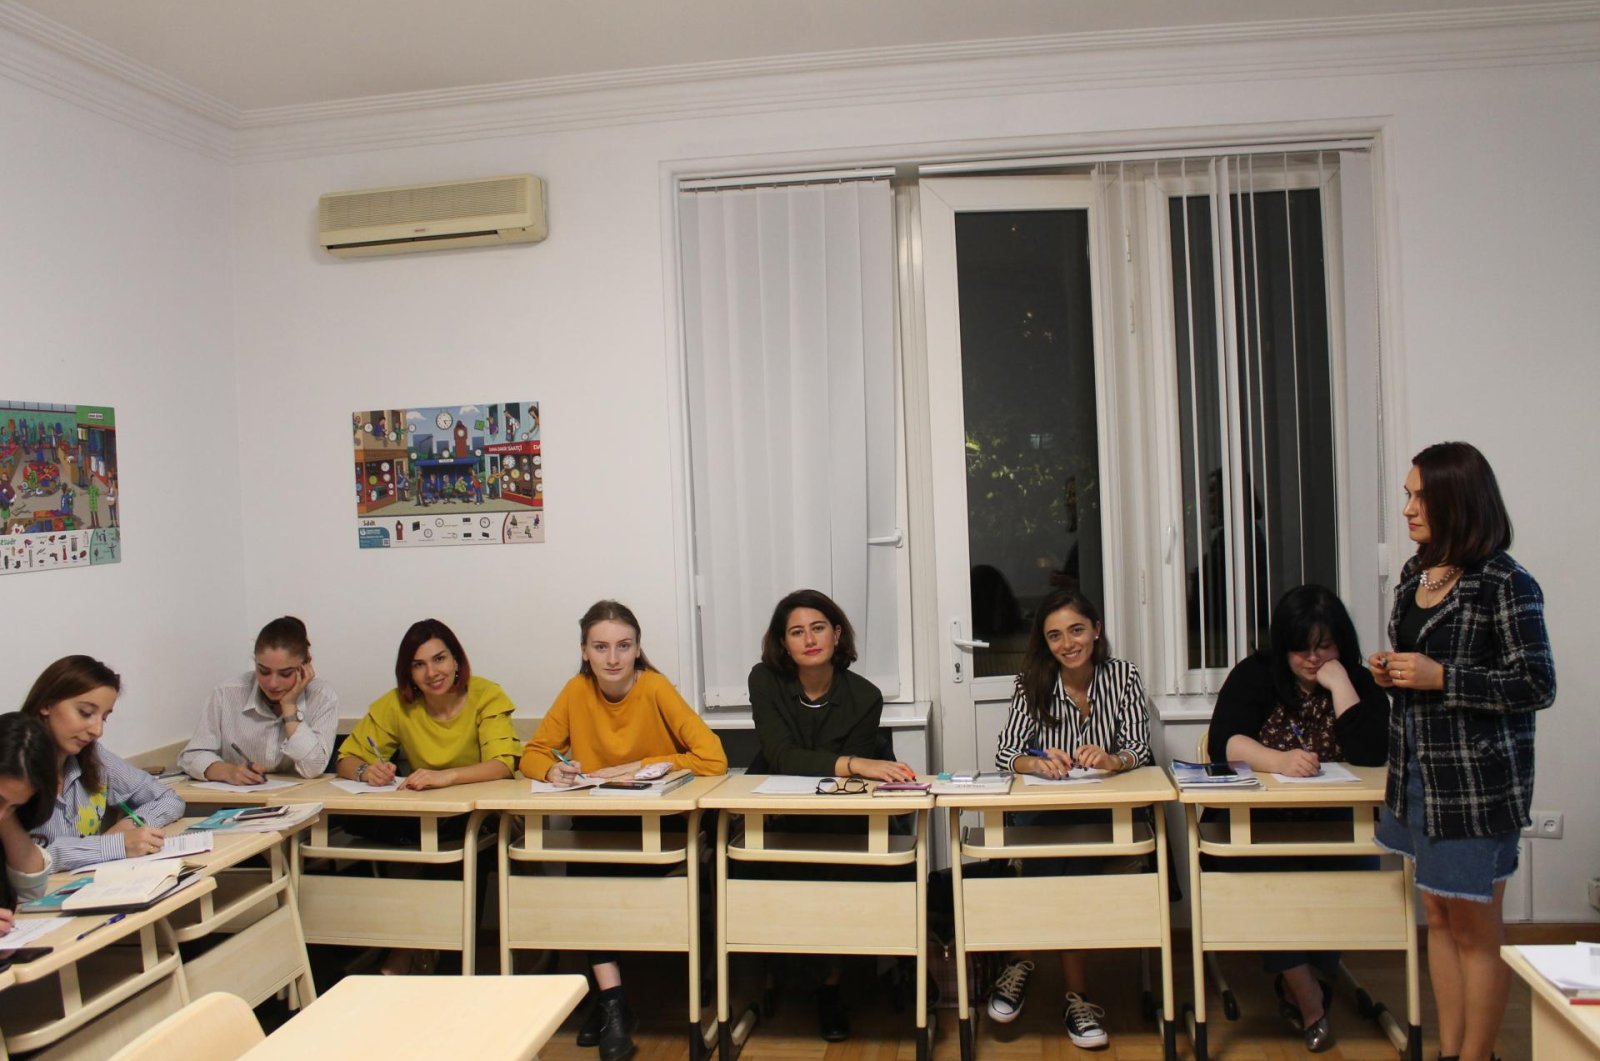 One of the classrooms of the Yunus Emre Institute, where students came together to learn Turkish before the coronavirus outbreak began, Tbilisi, Georgia. (Photo courtesy of Yunus Emre Institute)